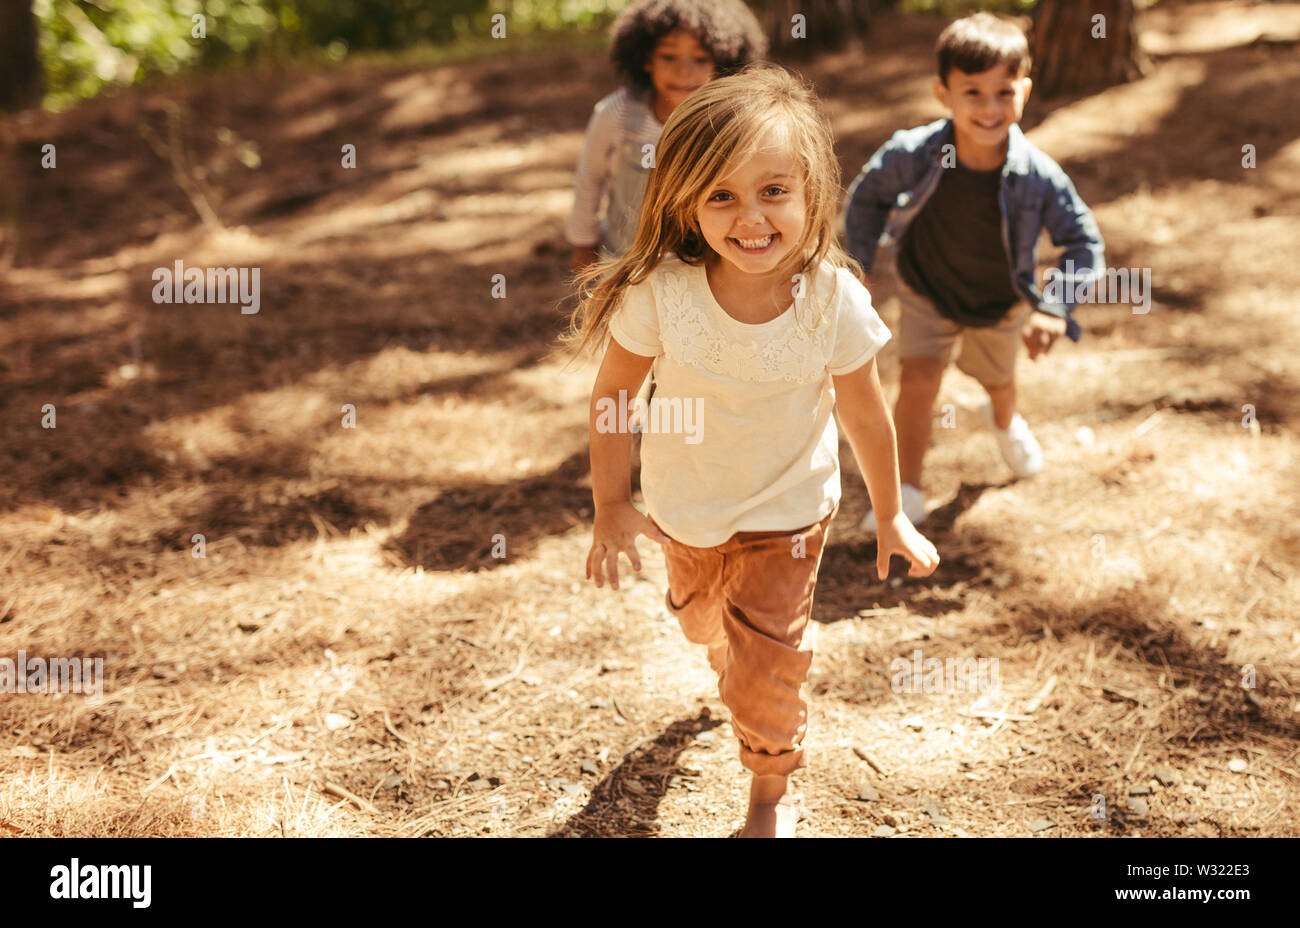 Cute girl running up hill in a park with friends. Group of kids playing together in forest. Stock Photo